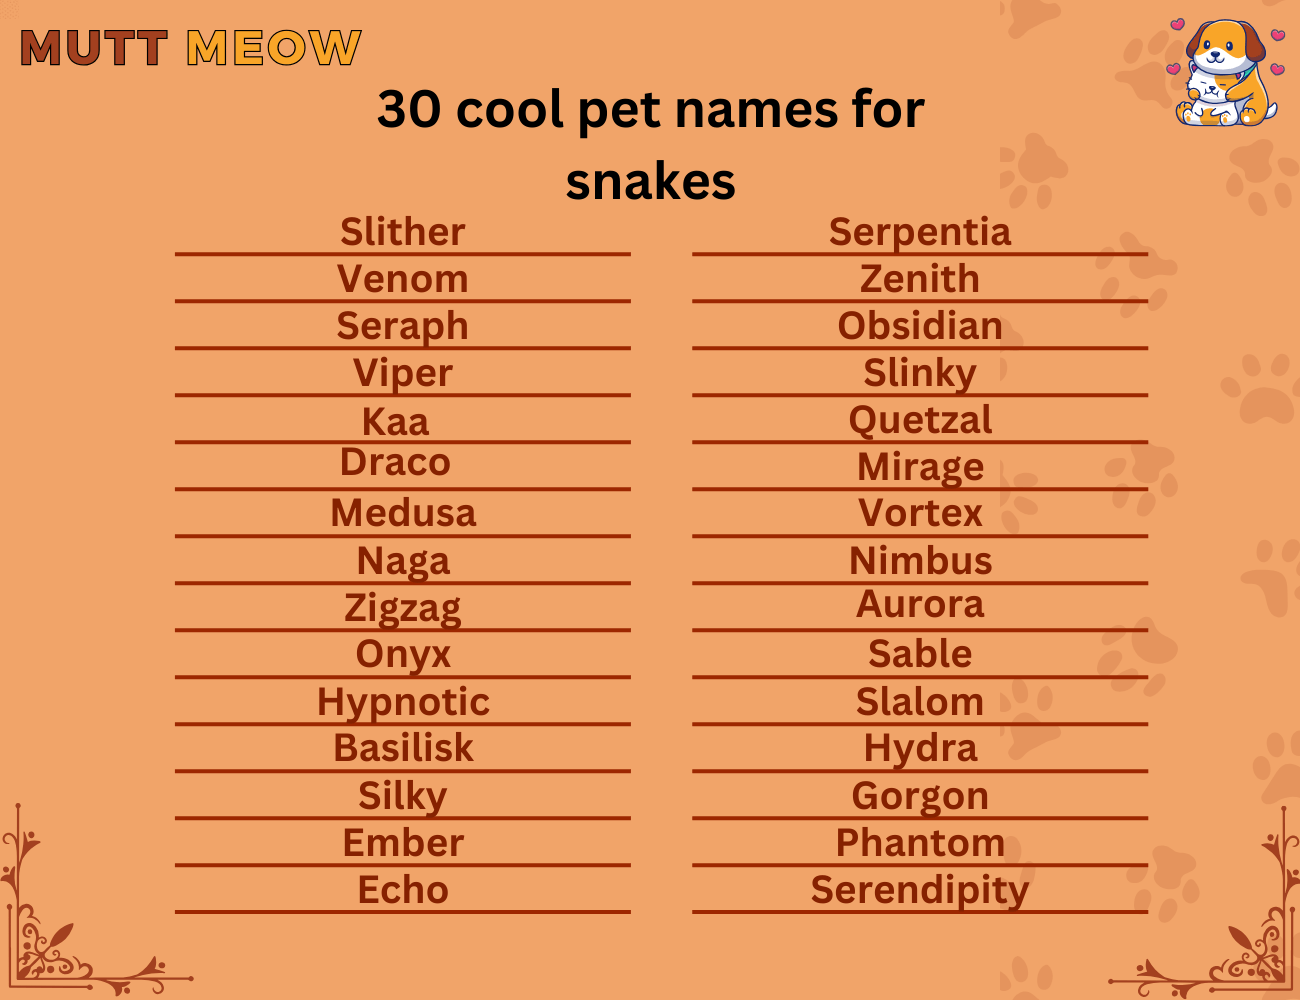 30 cool pet names for snakes